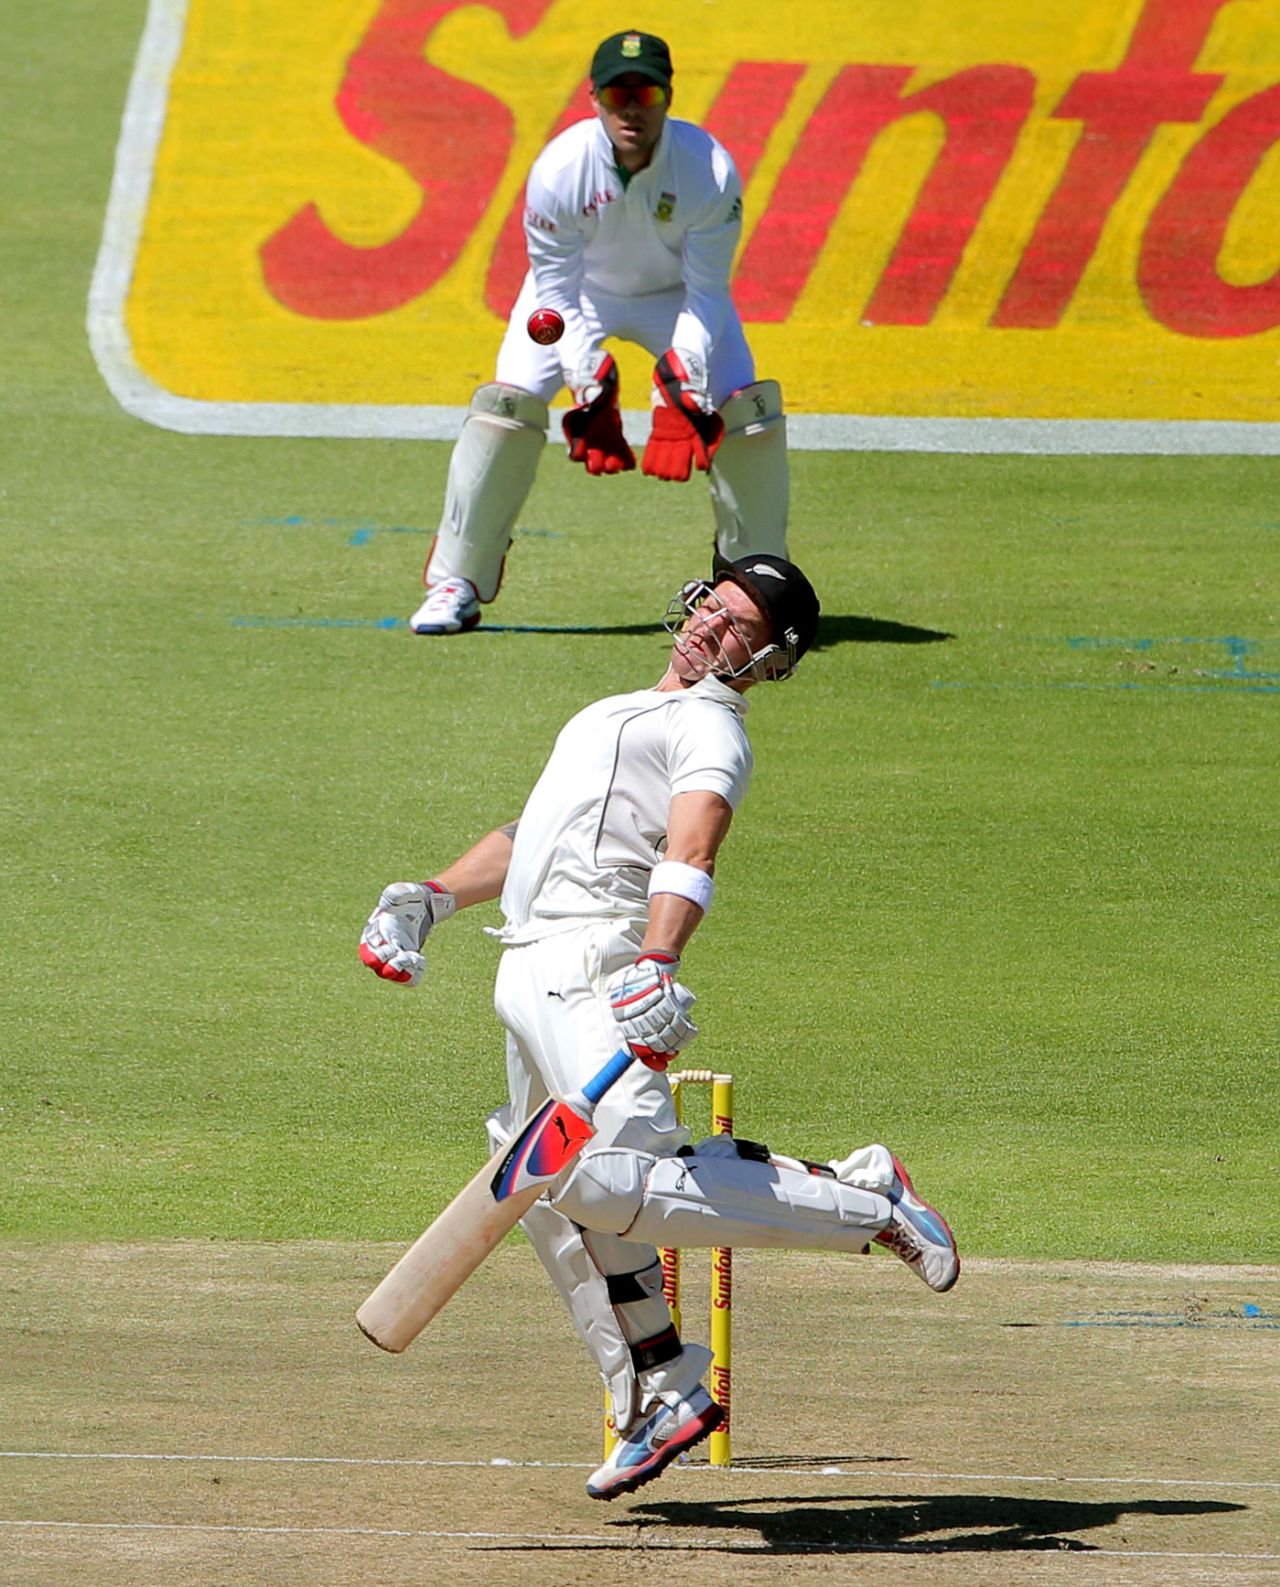 Brendon McCullum evades a bouncer, South Africa v New Zealand, 1st Test, Cape Town, 1st day, January 2, 2013